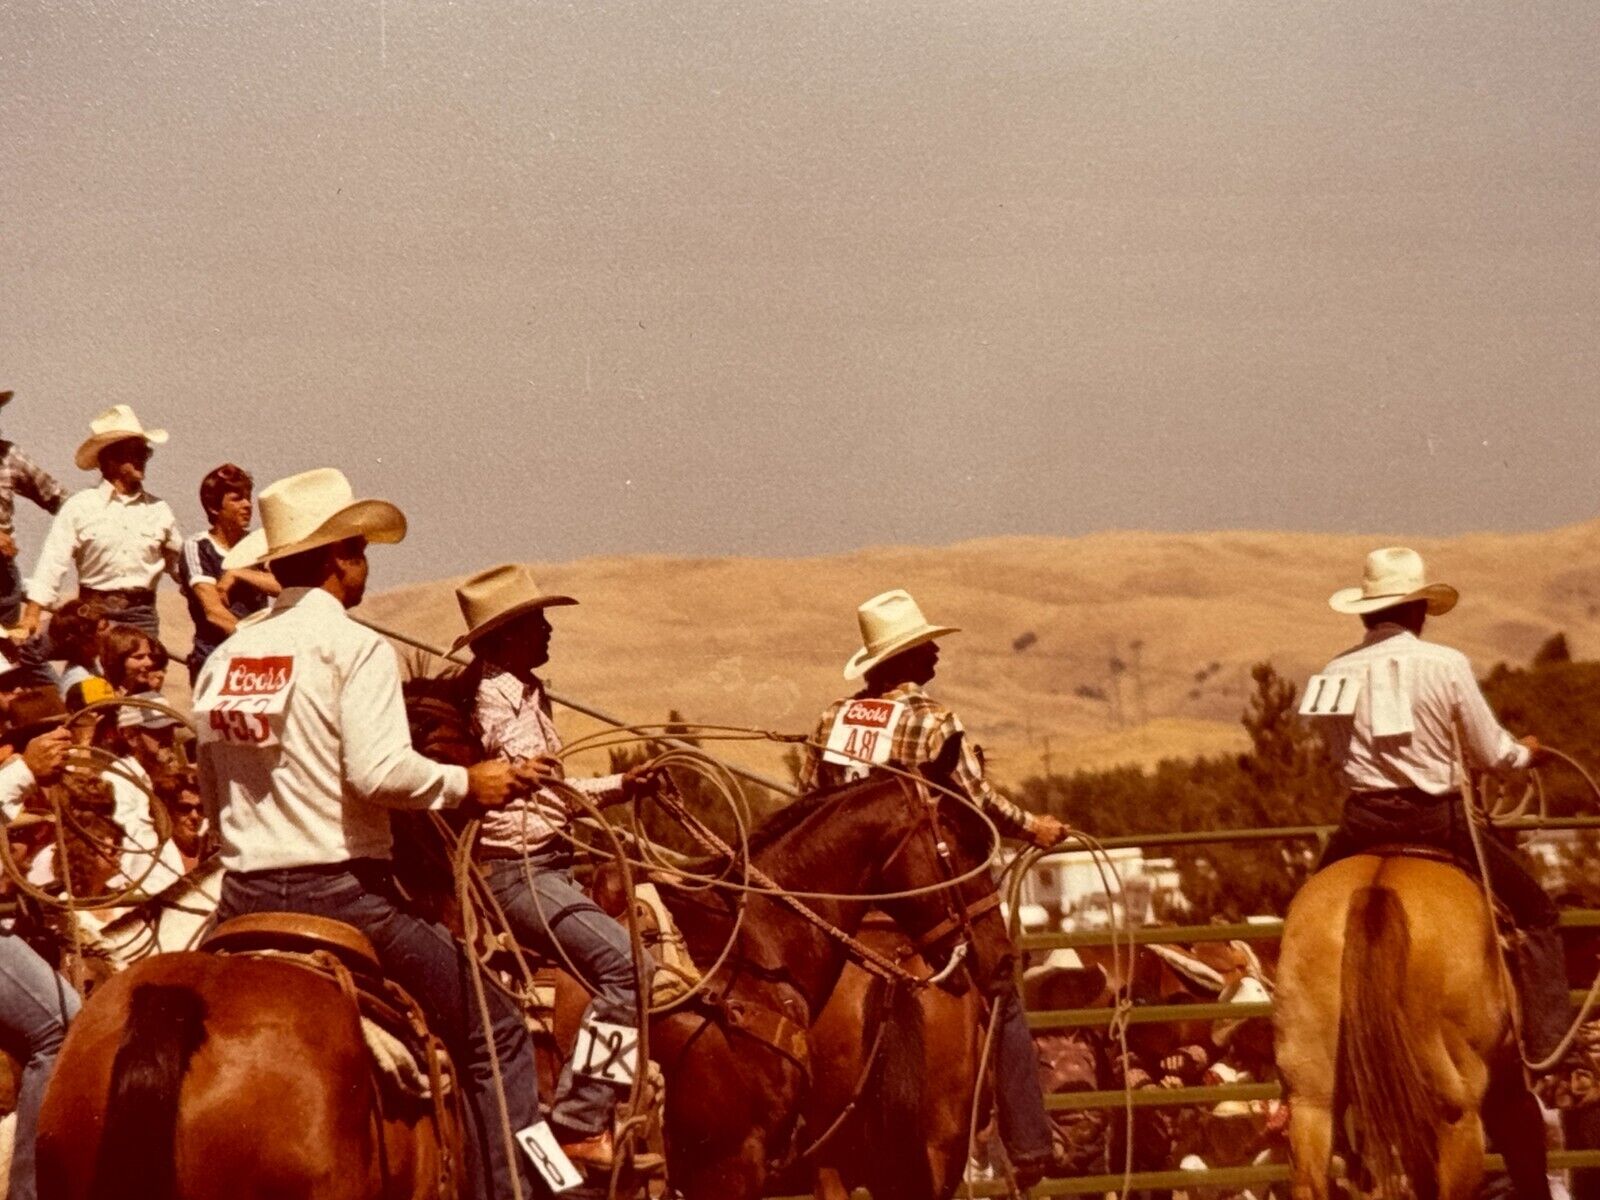 2G Photograph Rodeo View From Behind Backs Cowboys Hat Horses Lassos Coors Event